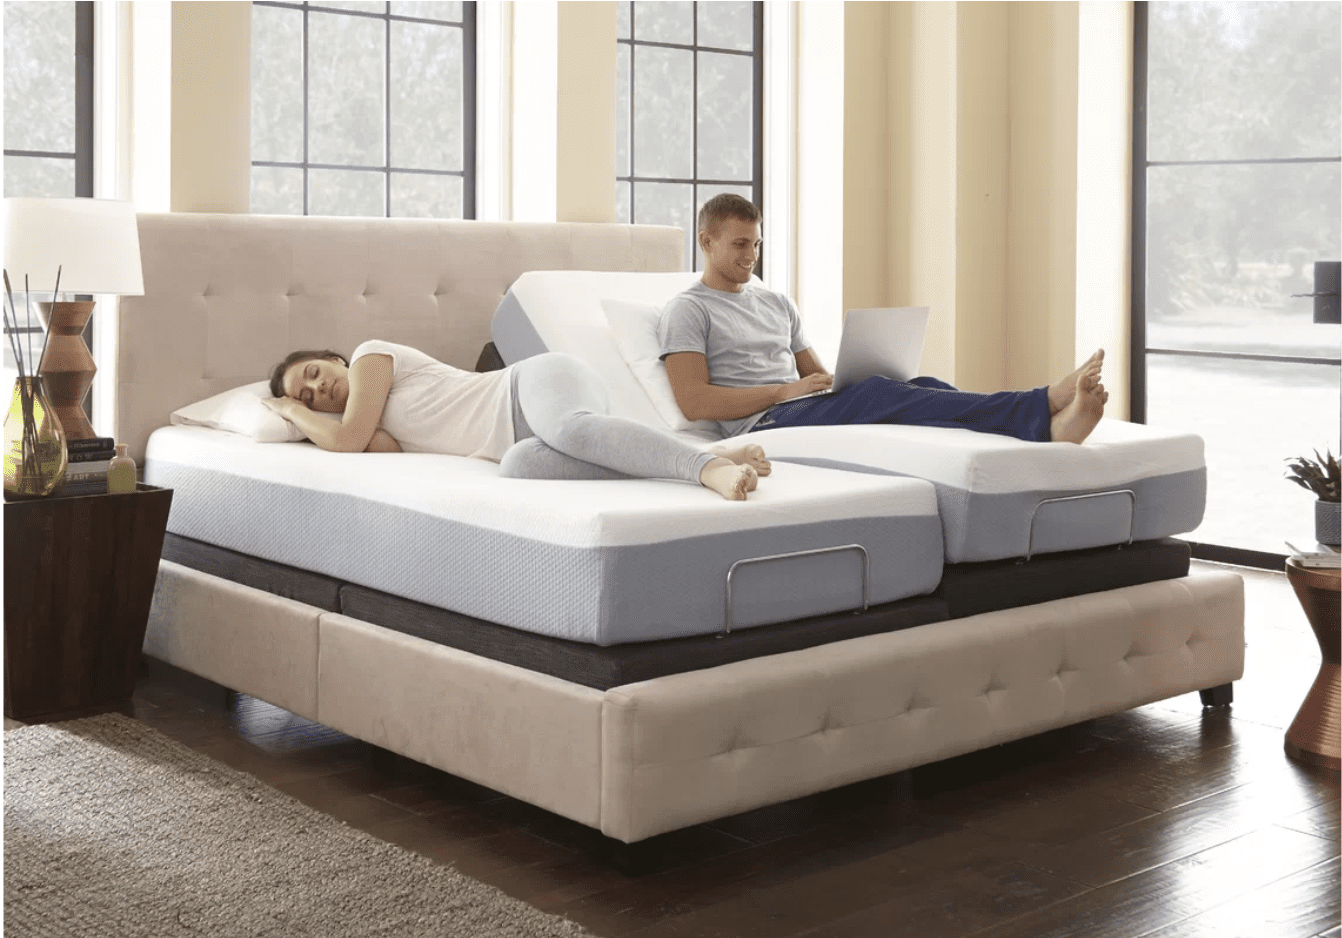 Top 4 reasons why Dynasty Mattress adjustable beds are in high demand?